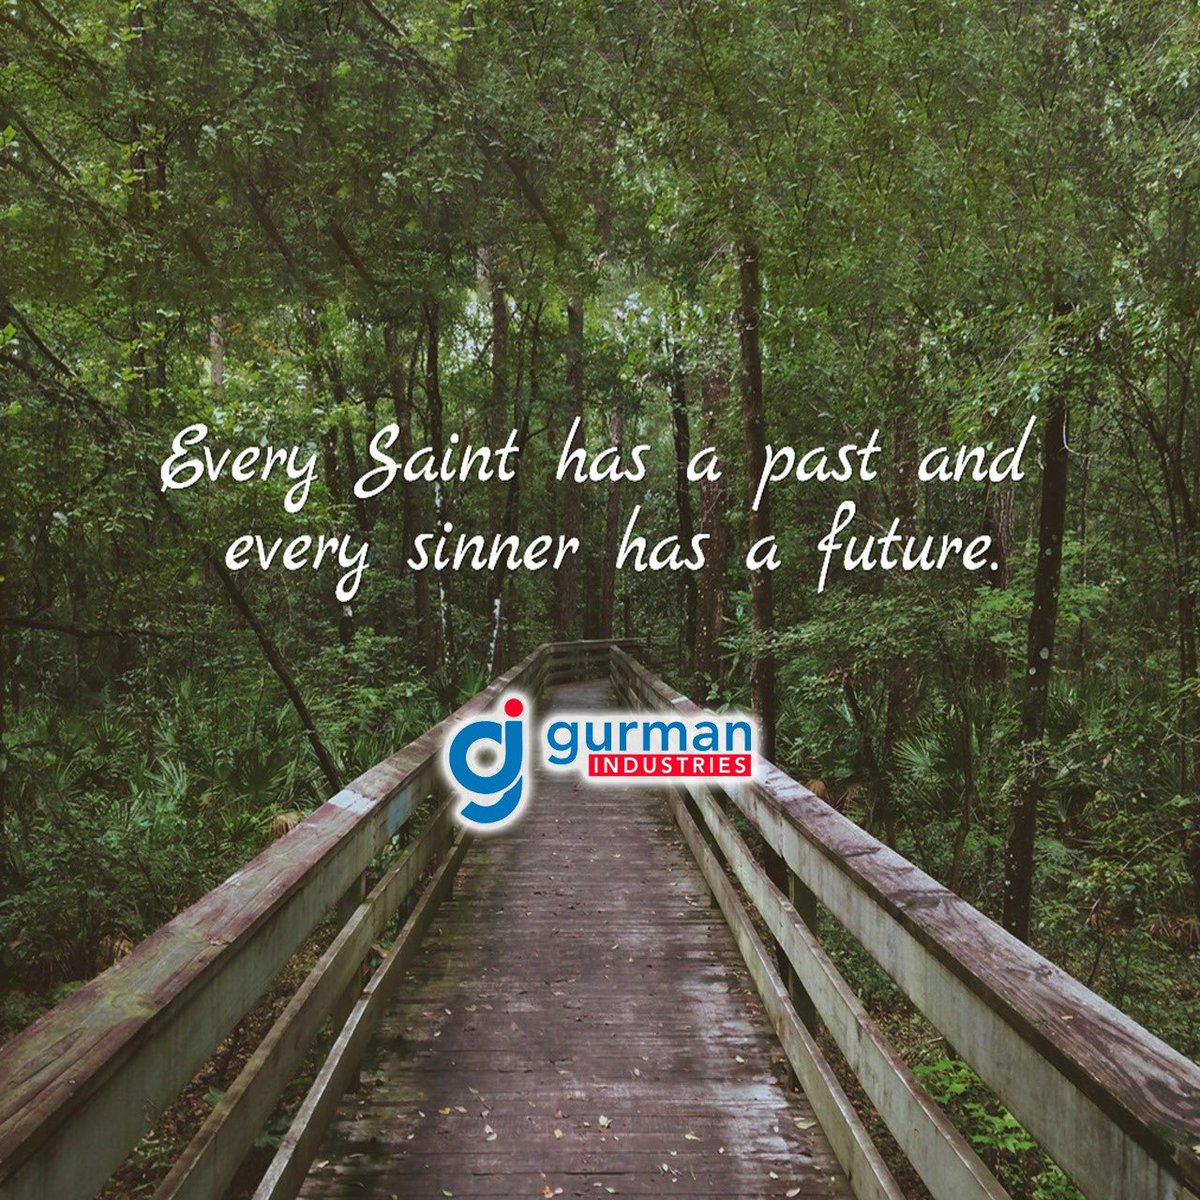 #Every #Saint has a #past and every #sinner has a #future #GurmanIndustries